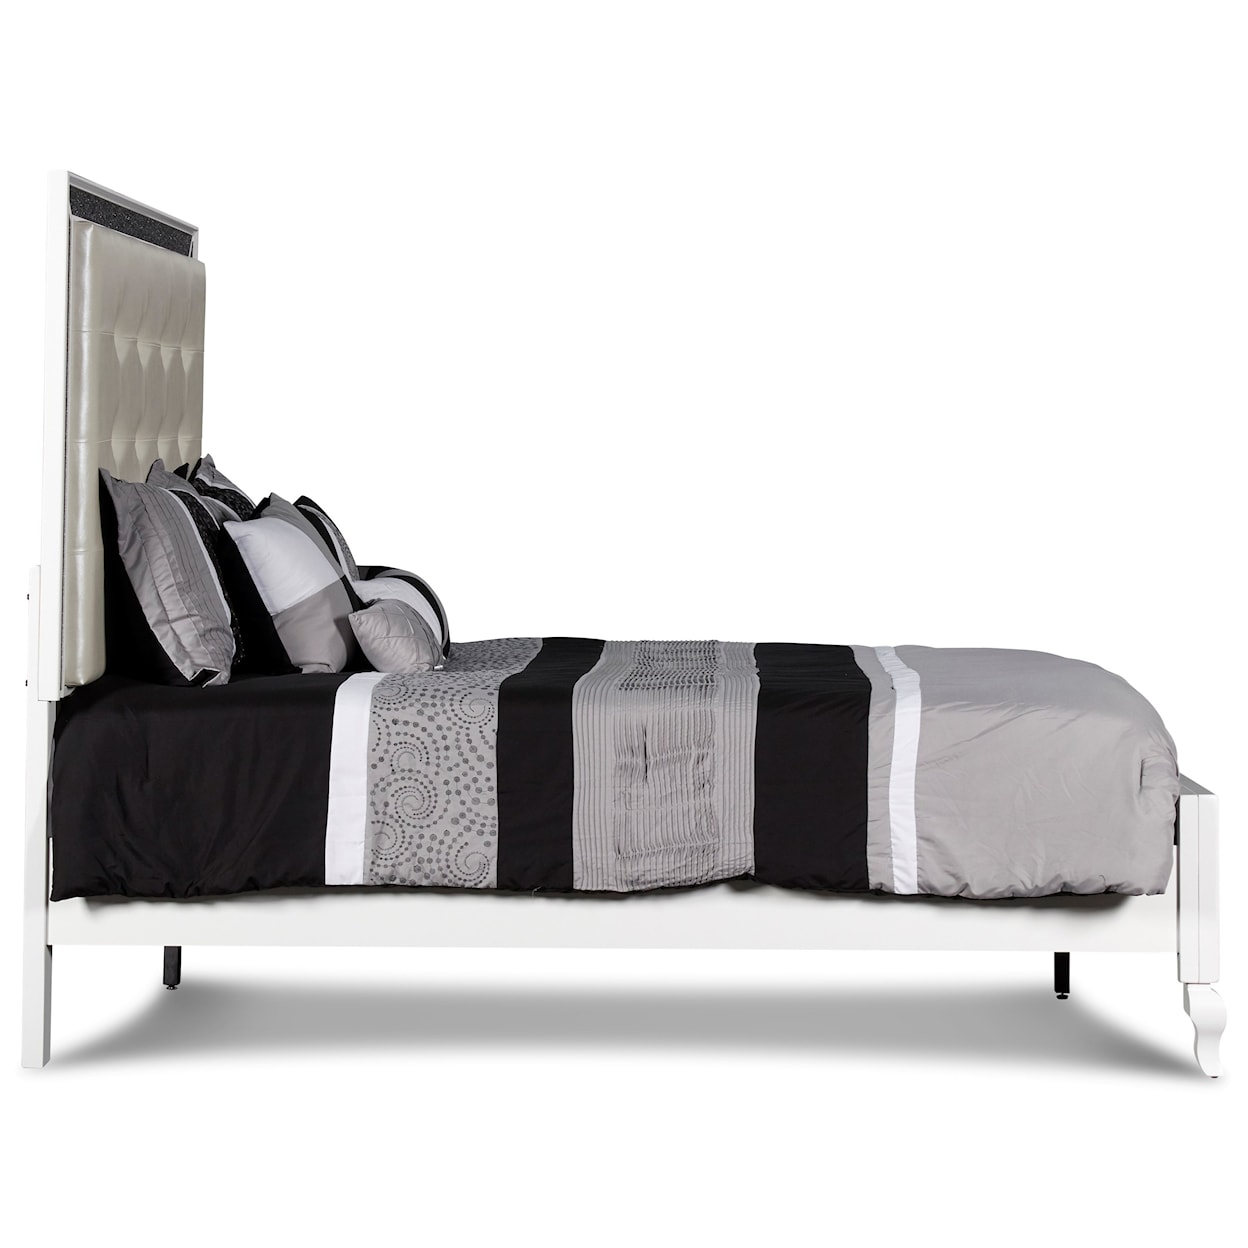 New Classic Furniture Park Imperial King Panel Bed